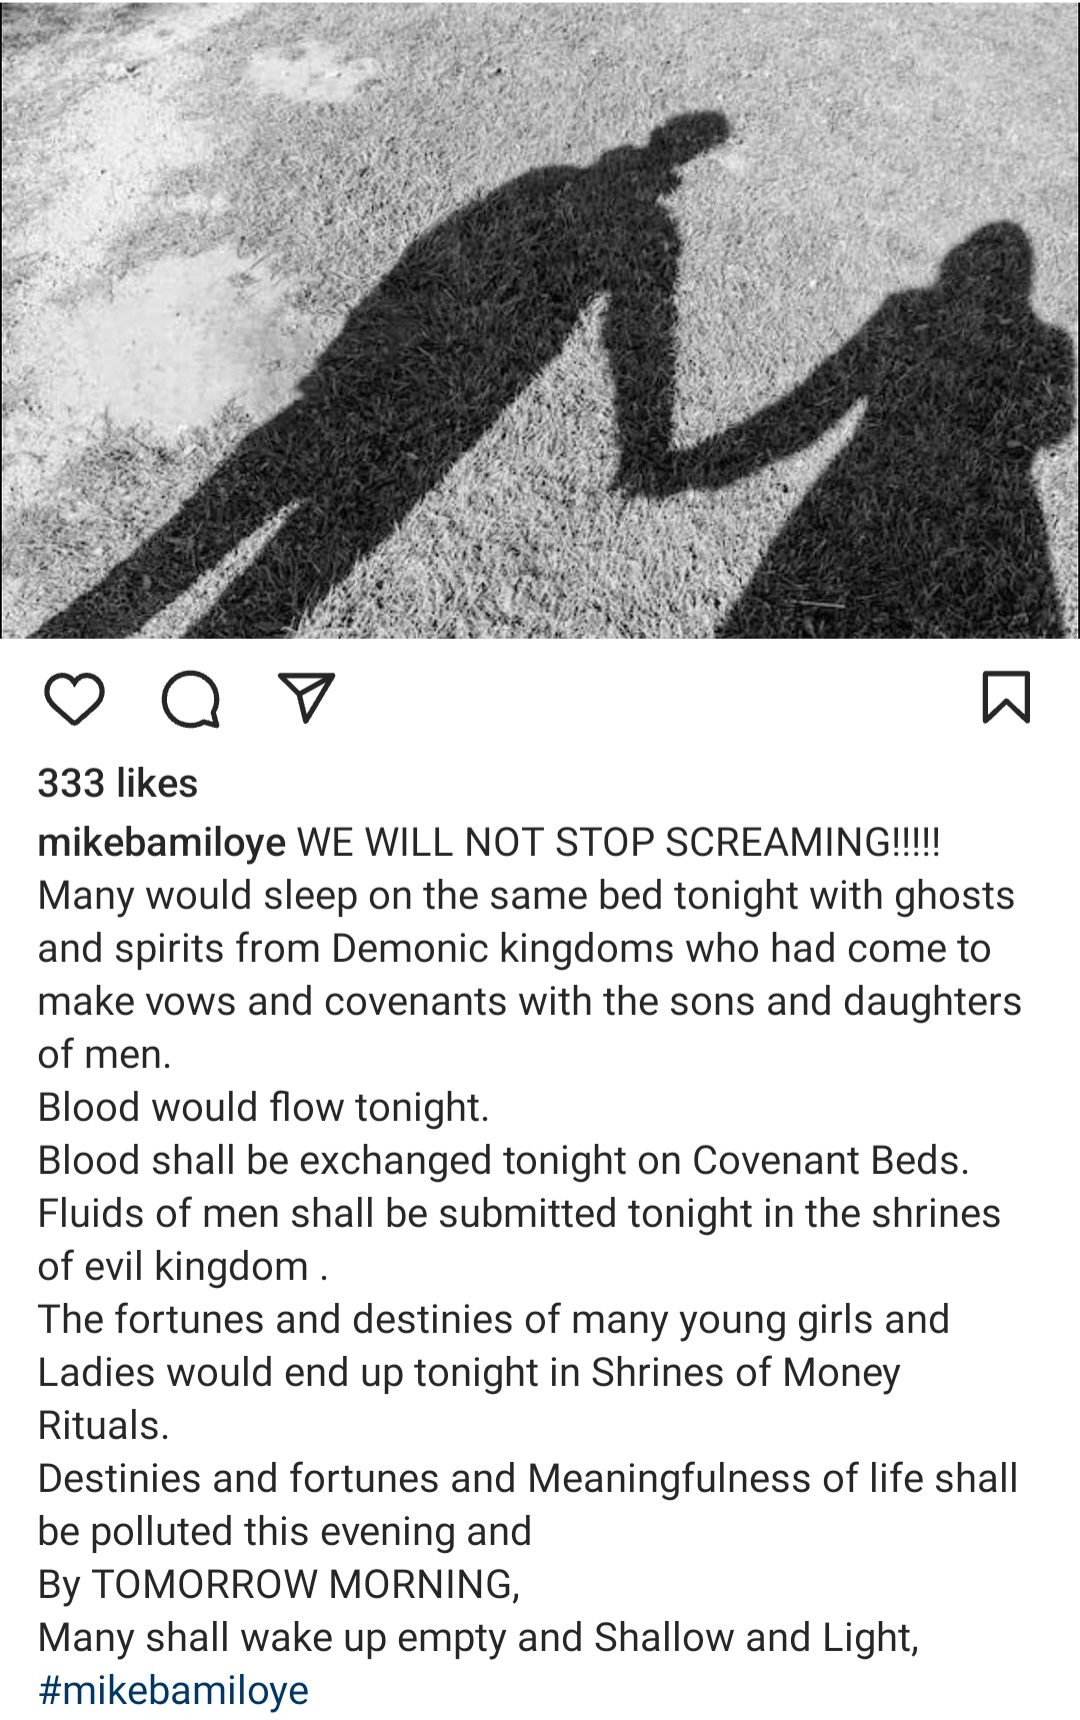 "Many would sleep on the same bed tonight with ghosts and spirits" Mike Bamiloye warns those celebrating Valentine